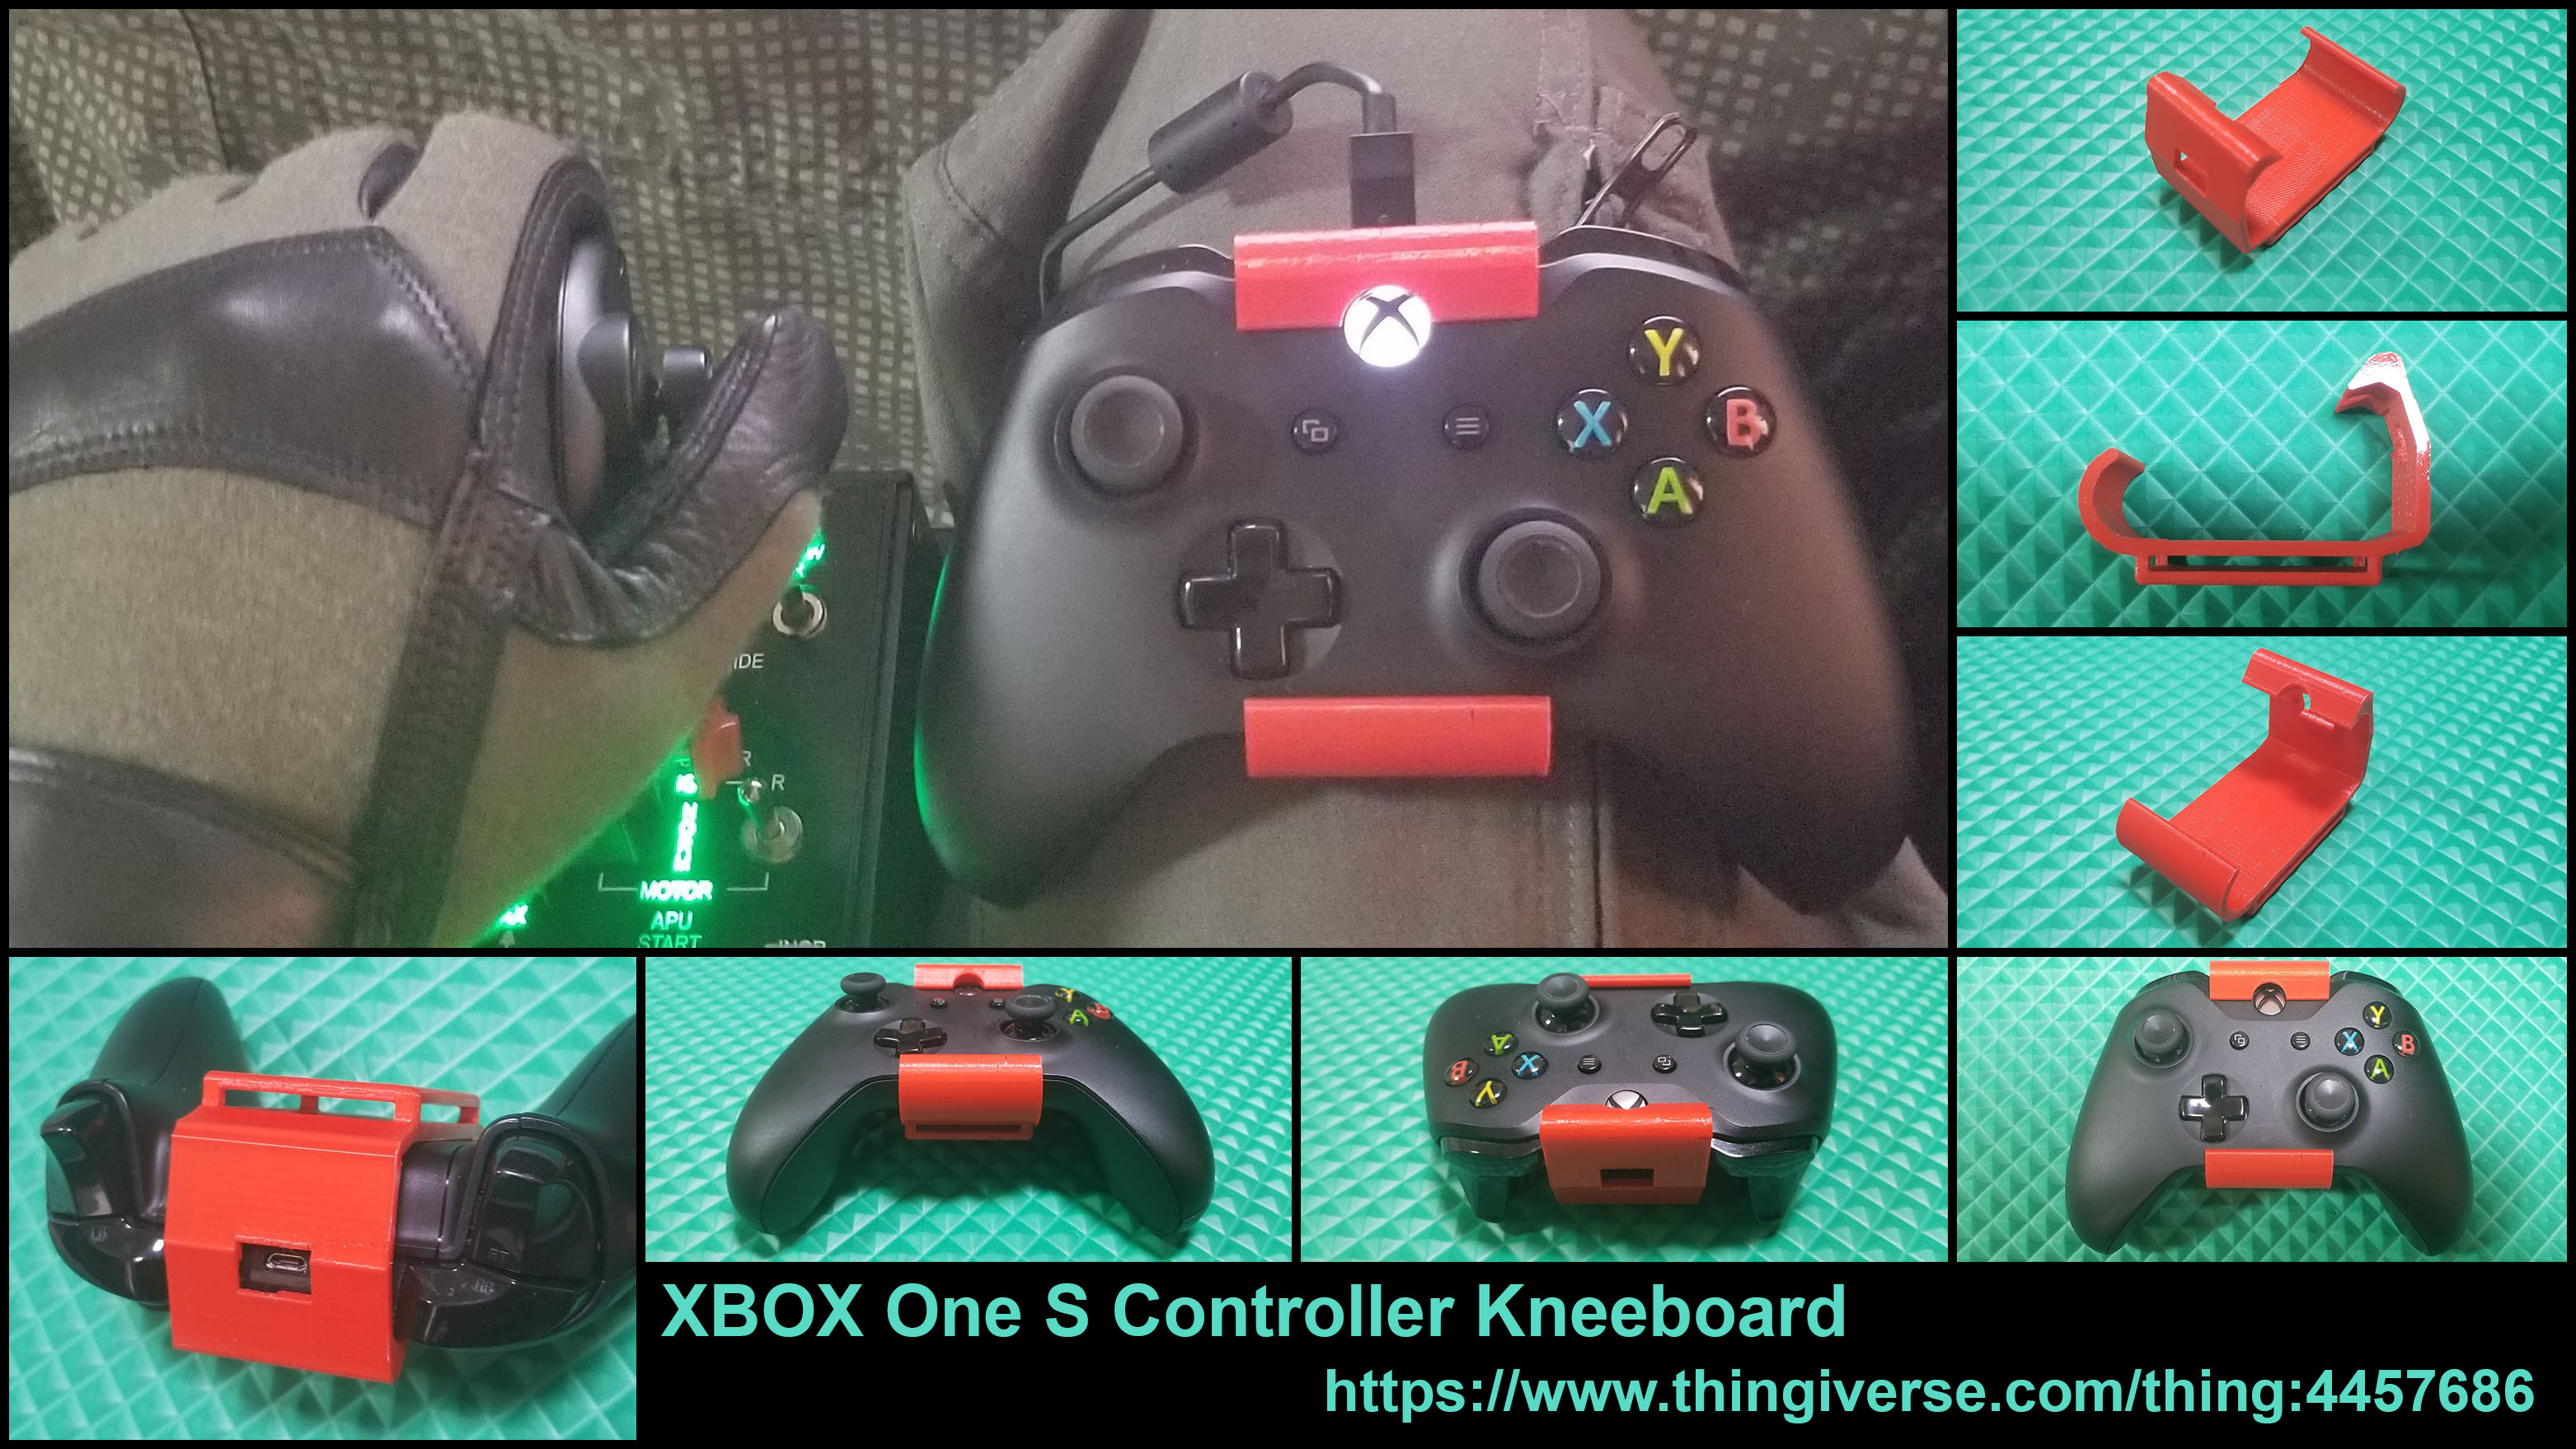 Xbox One S Controller Kneeboard